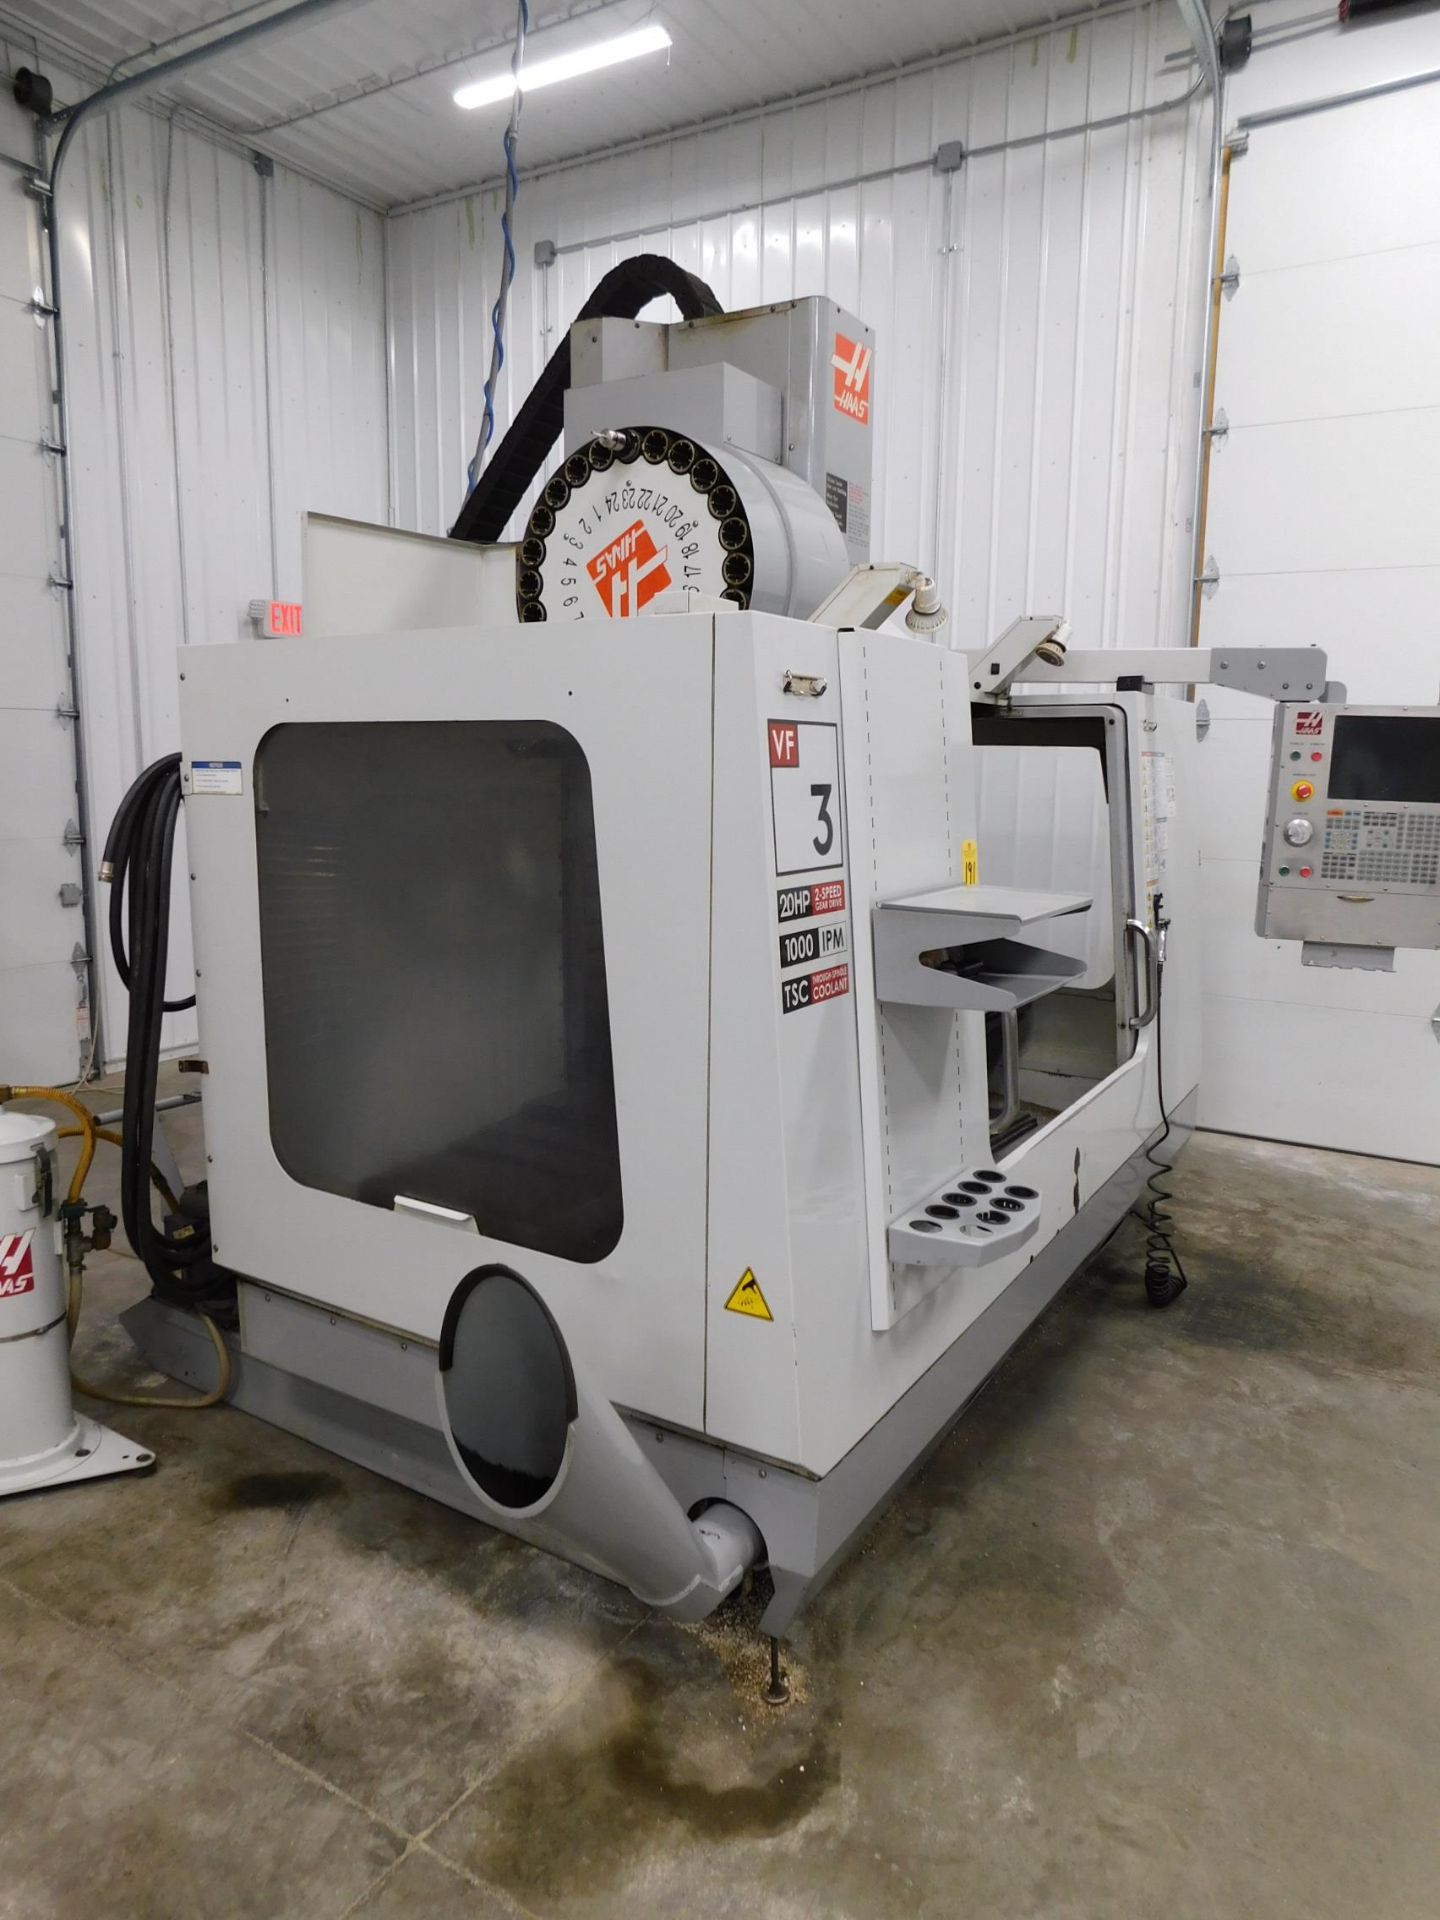 Haas VF-3 Vertical Machining Center sn 1066803, New In 2008, 18"X48" Table, 24ATC, 40Taper - Image 11 of 18